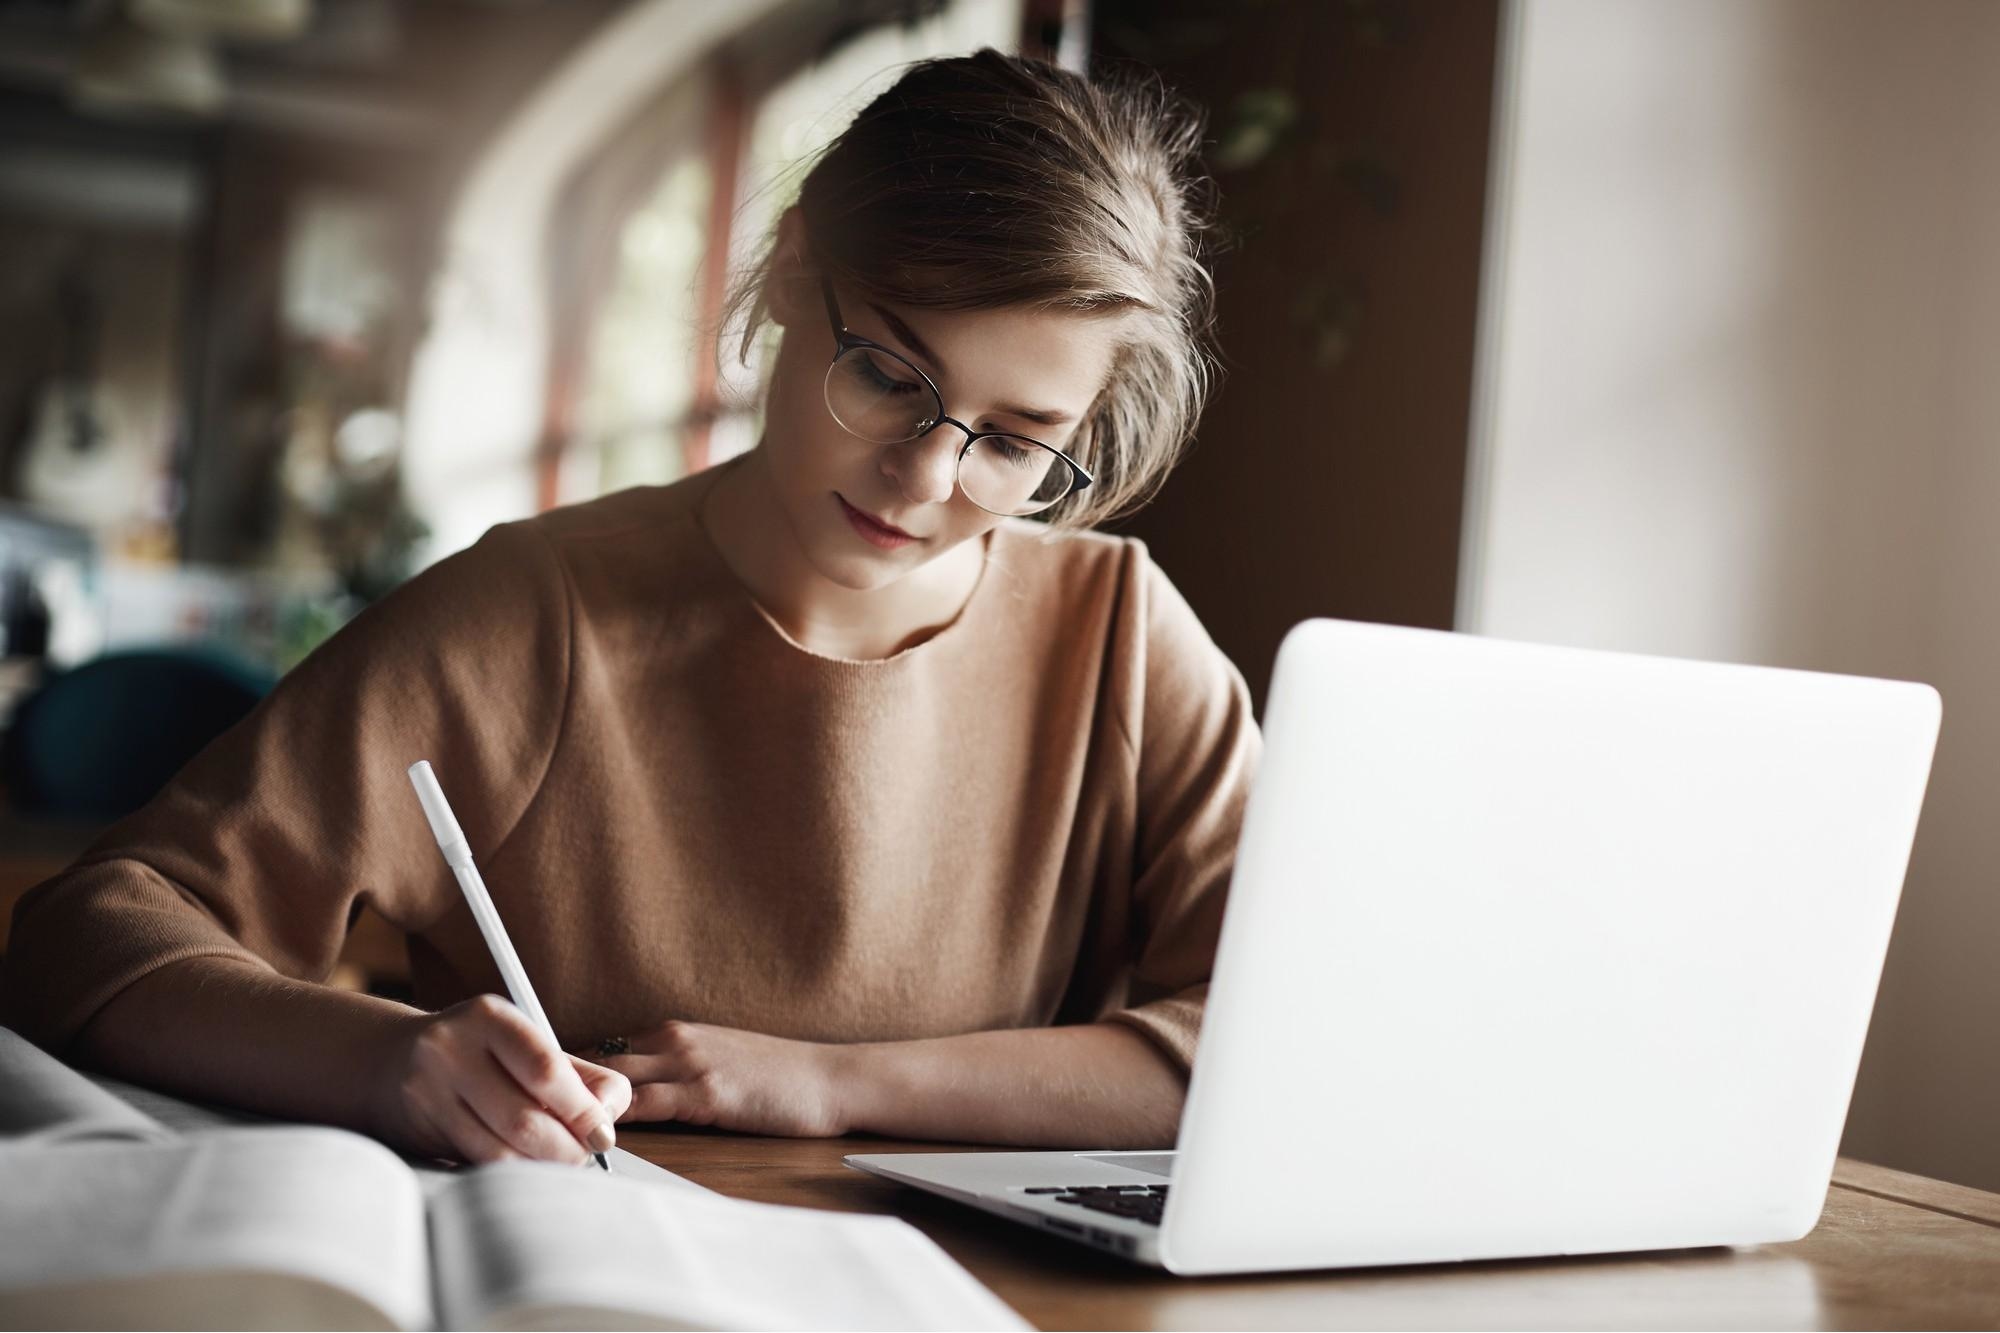 Focused woman concentrating writing essay